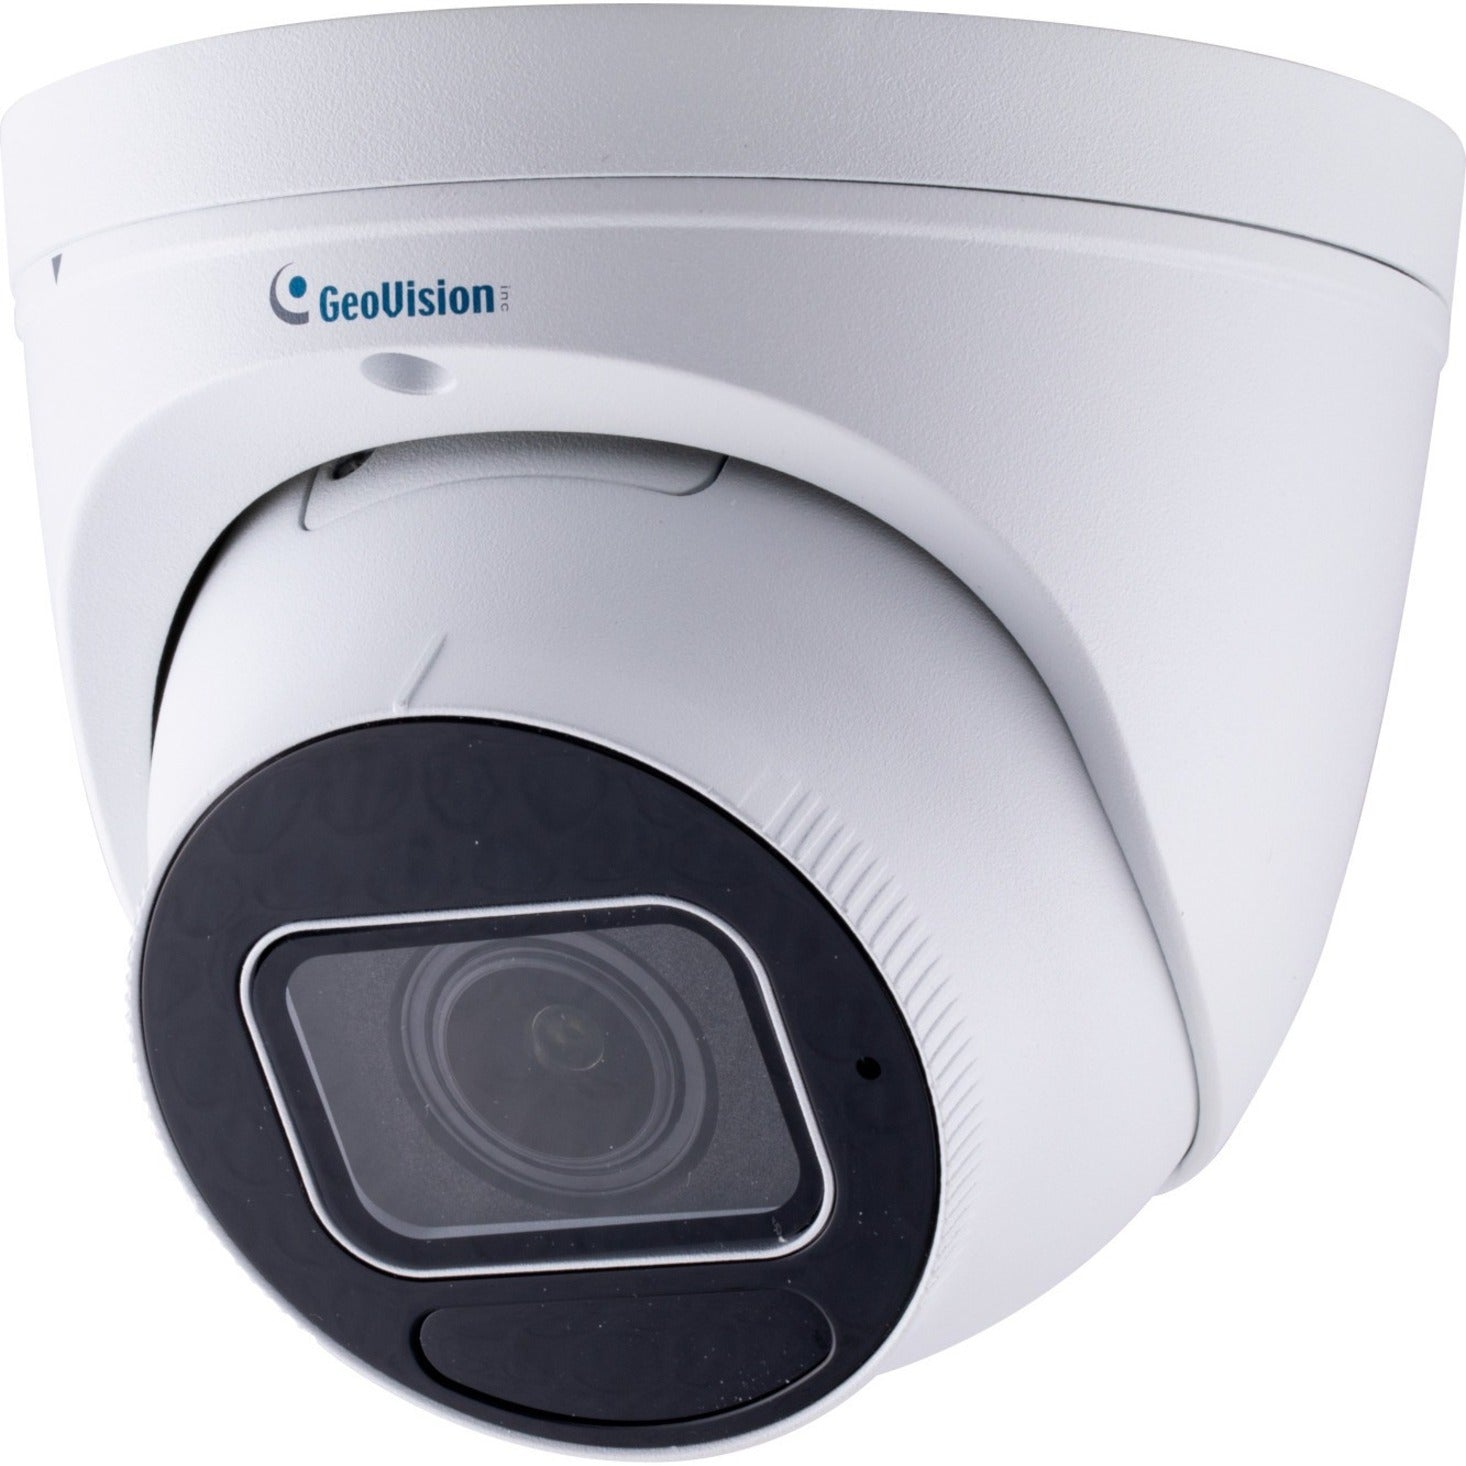 GeoVision 125-EBD4813-000 AI 4MP H.265 5x Zoom Super Low Lux WDR Pro IR Eyeball Dome IP Camera, Outdoor Security Surveillance, 2.7-13.5mm Lens